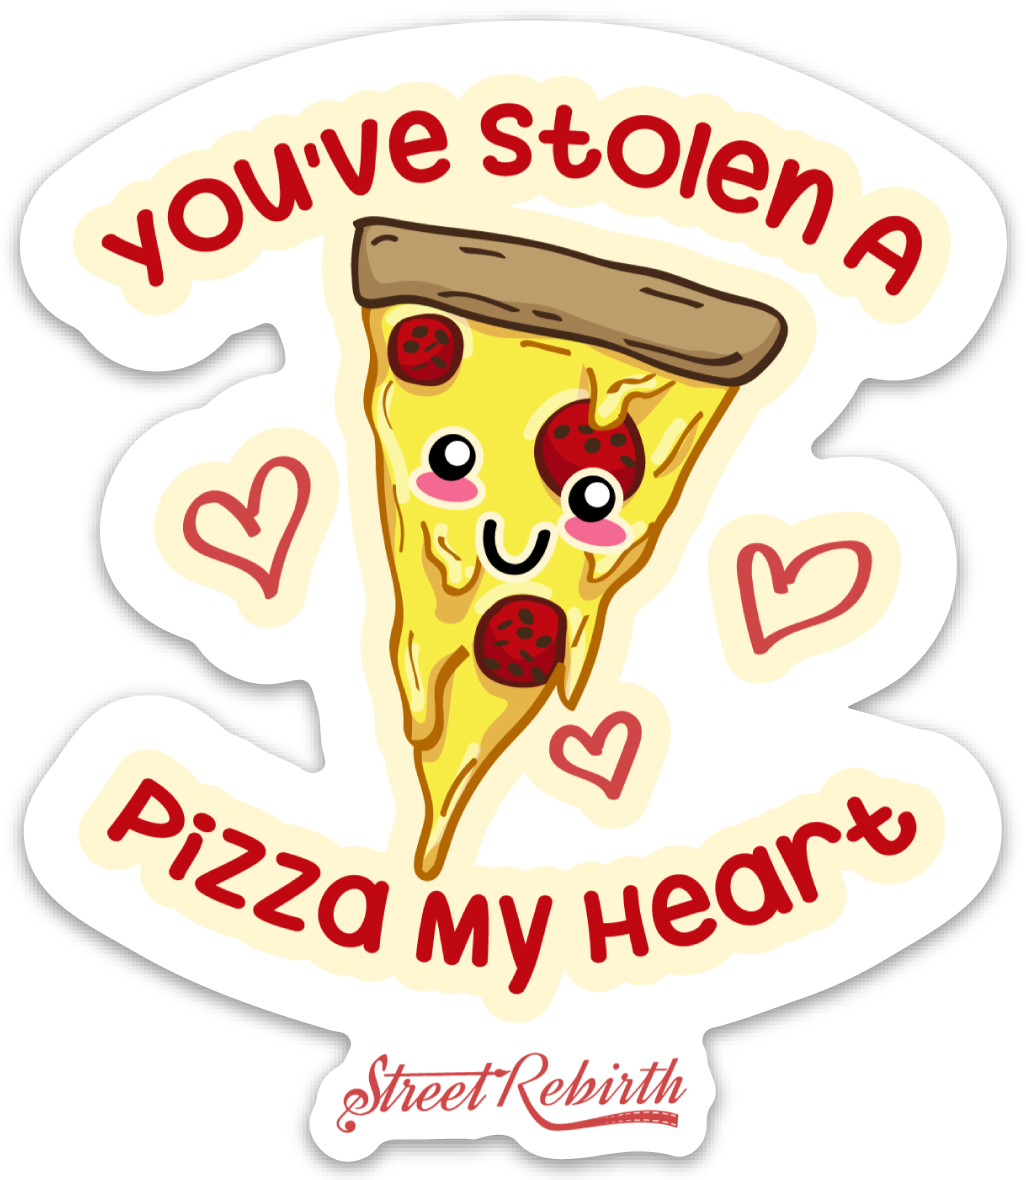 You've Stolen a Pizza My Heart PUN STICKER – ONE 4 INCH WATER PROOF VINYL STICKER – FOR HYDRO FLASK, SKATEBOARD, LAPTOP, PLANNER, CAR, COLLECTING, GIFTING